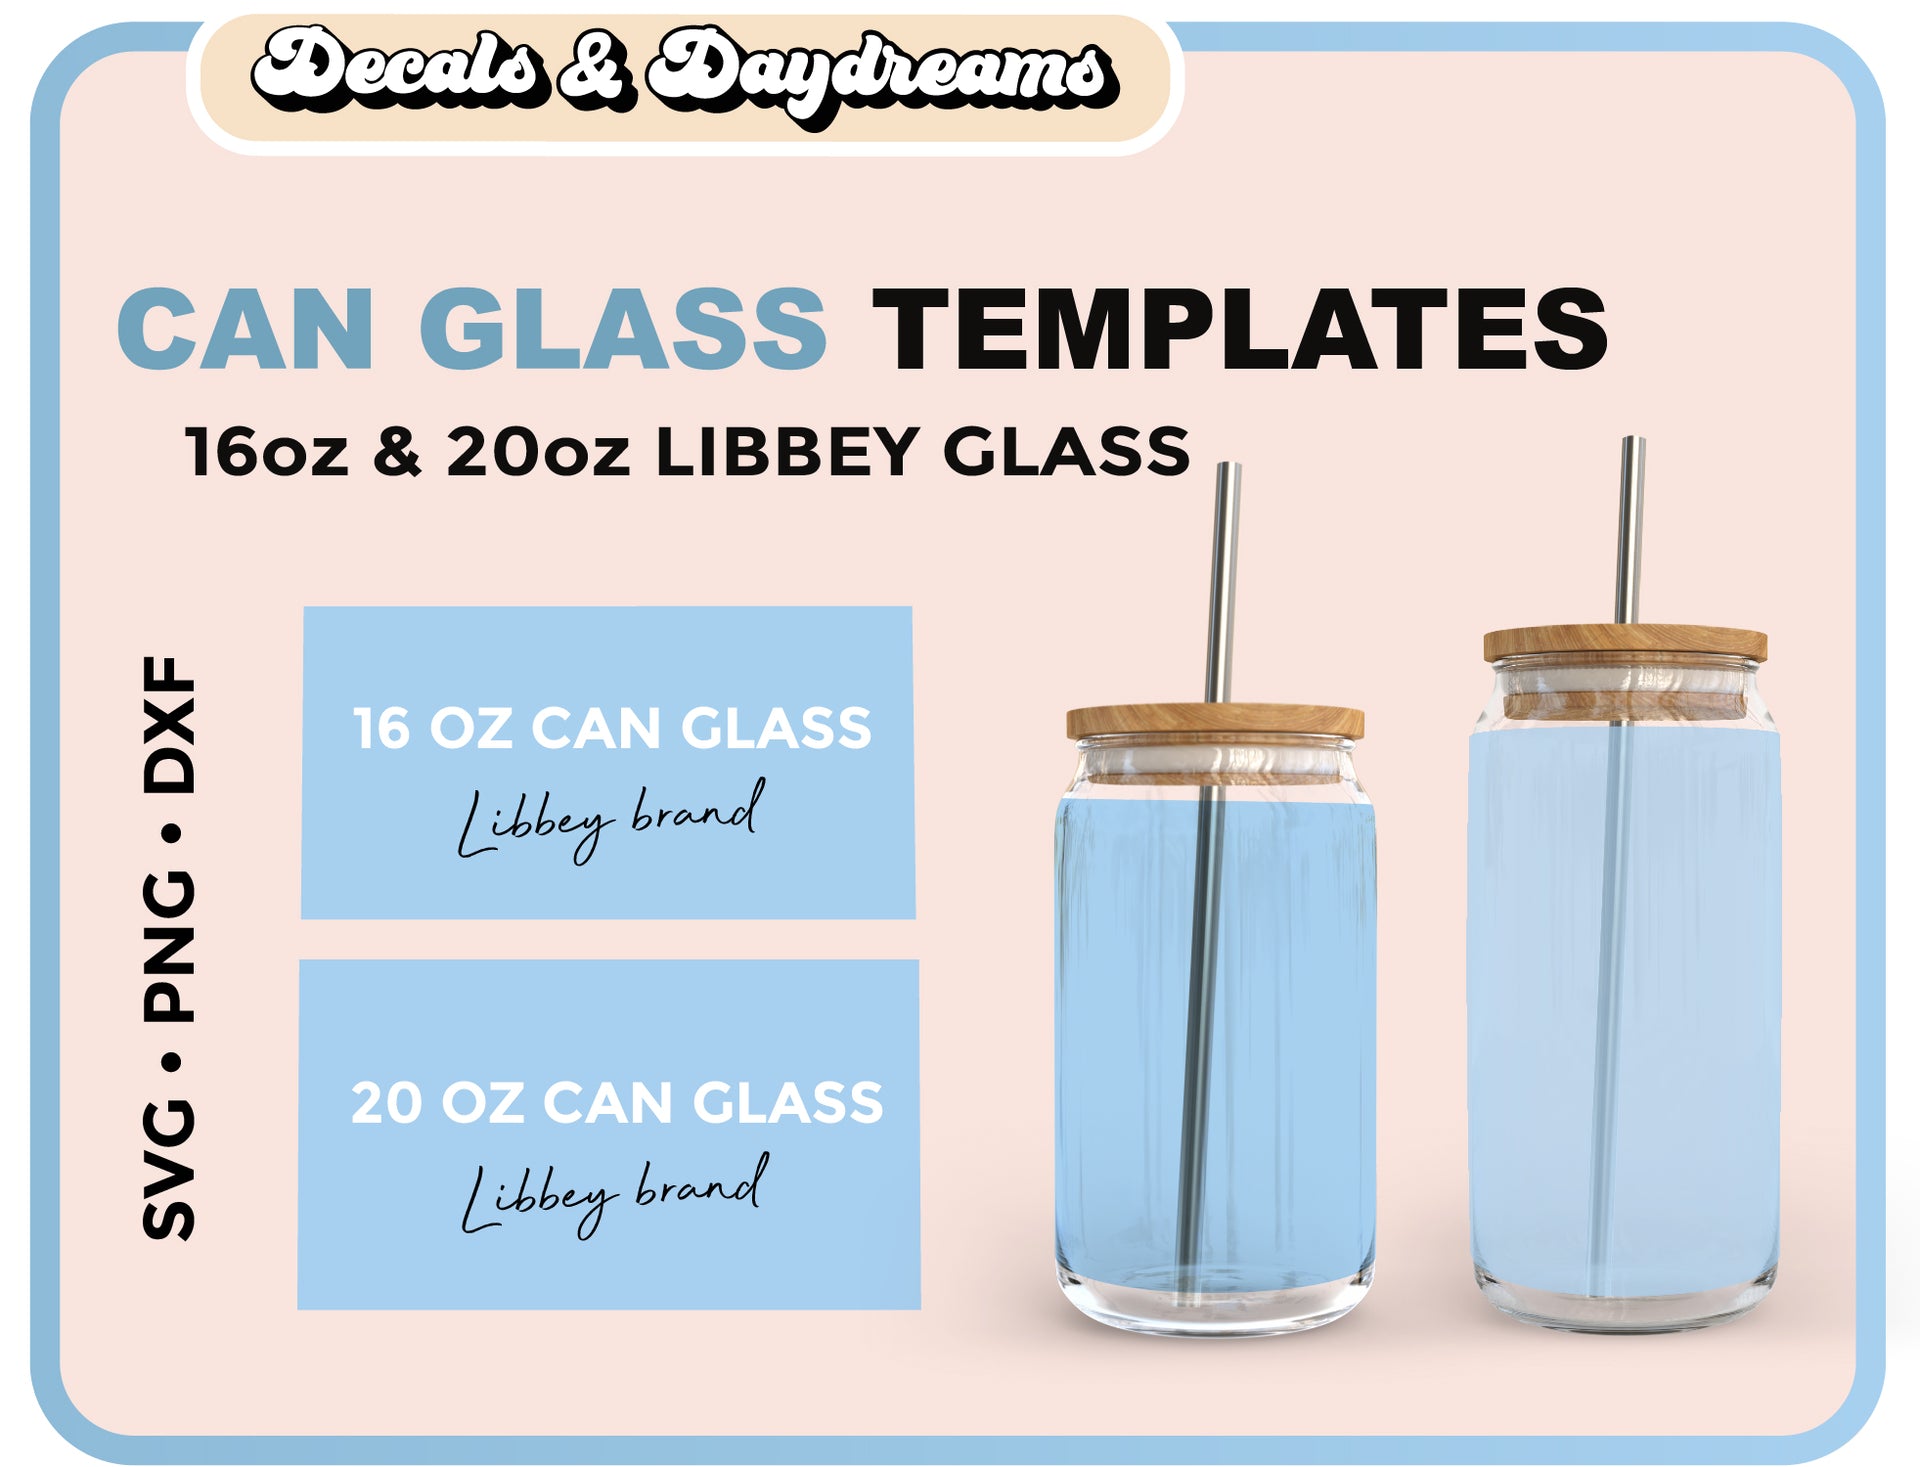 Libbey 16 Oz and 20 Oz Can Glass Wrap Template | Tiger skin for Libbey Can  Shaped Beer Glass